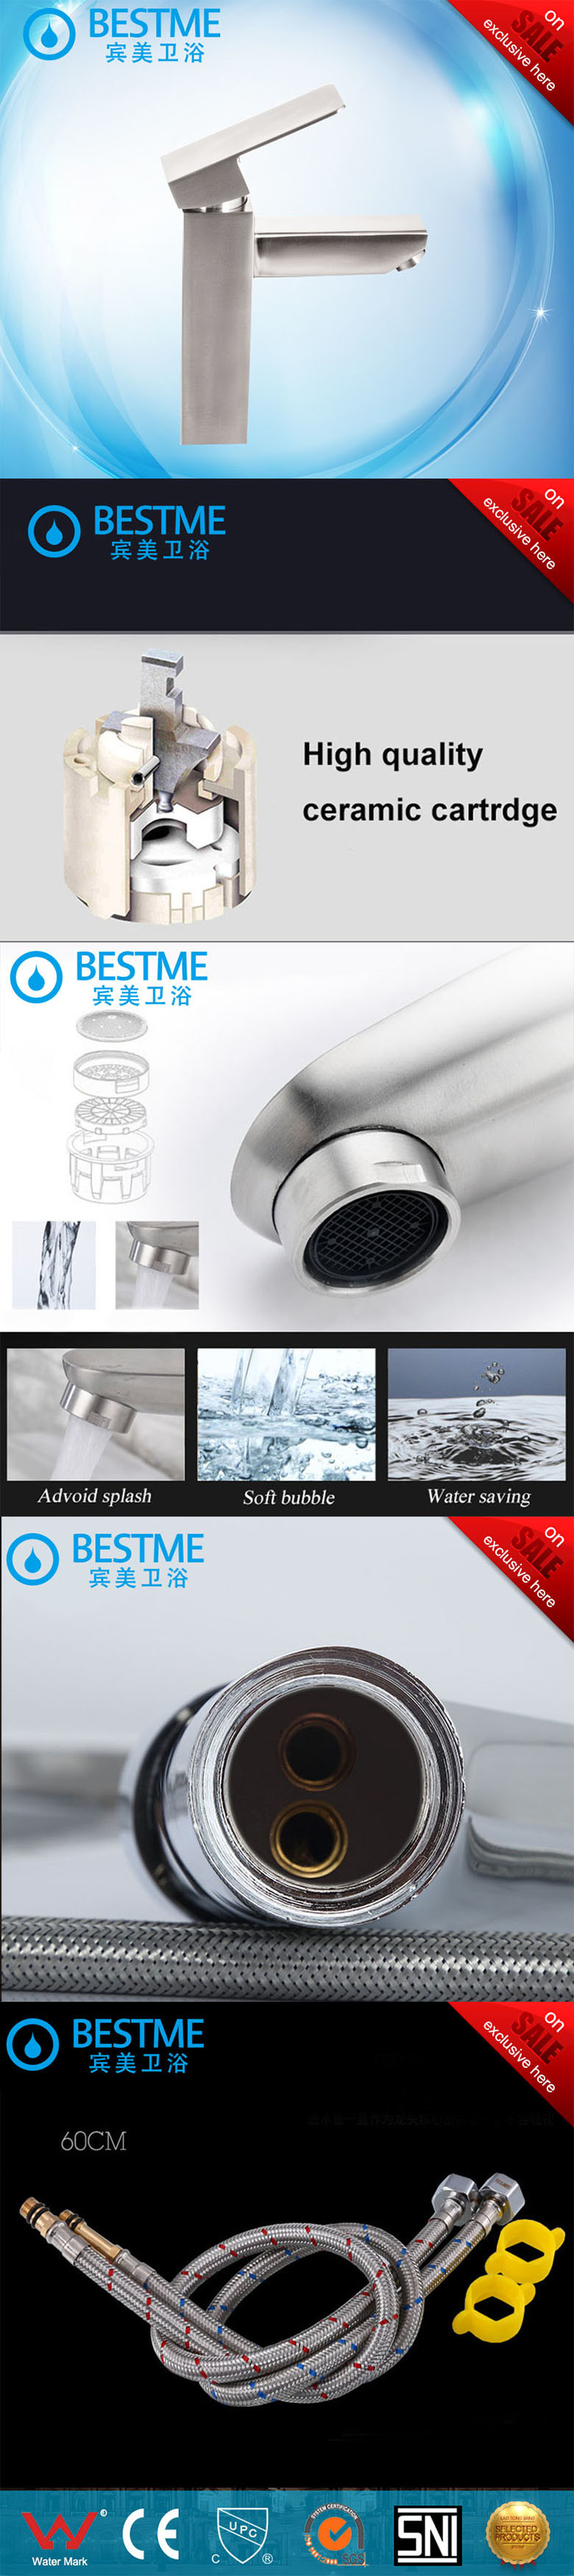 304 Stainless Steel Bath Sanitary Ware Faucet with Ceramic Cartridge (BMS-B1005)